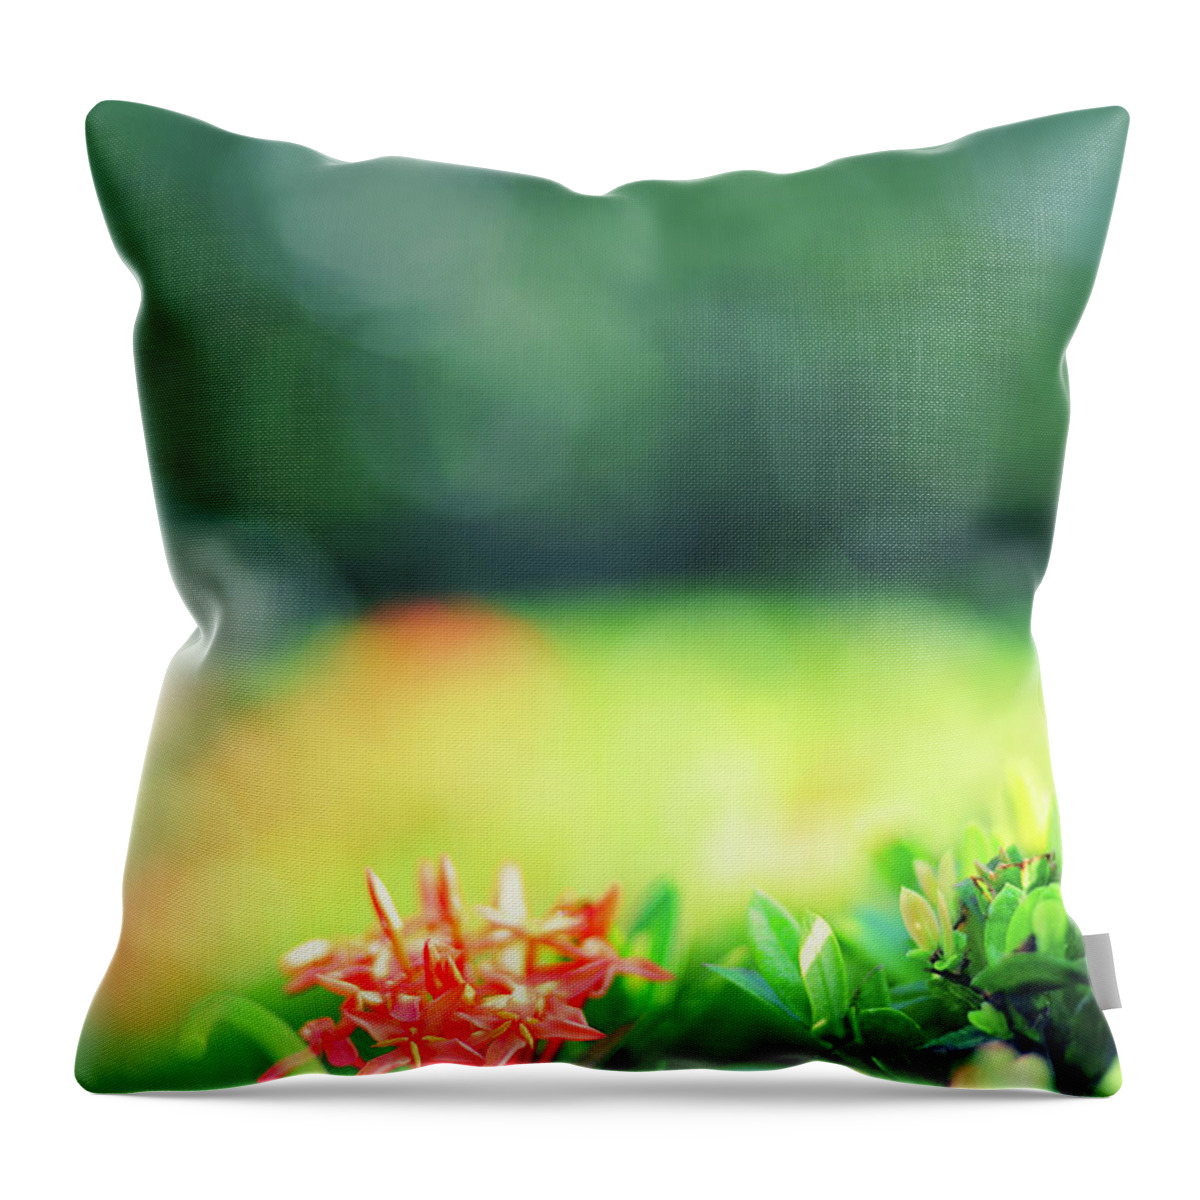 Flowerbed Throw Pillow featuring the photograph Beautiful Spring Flowers by Primeimages